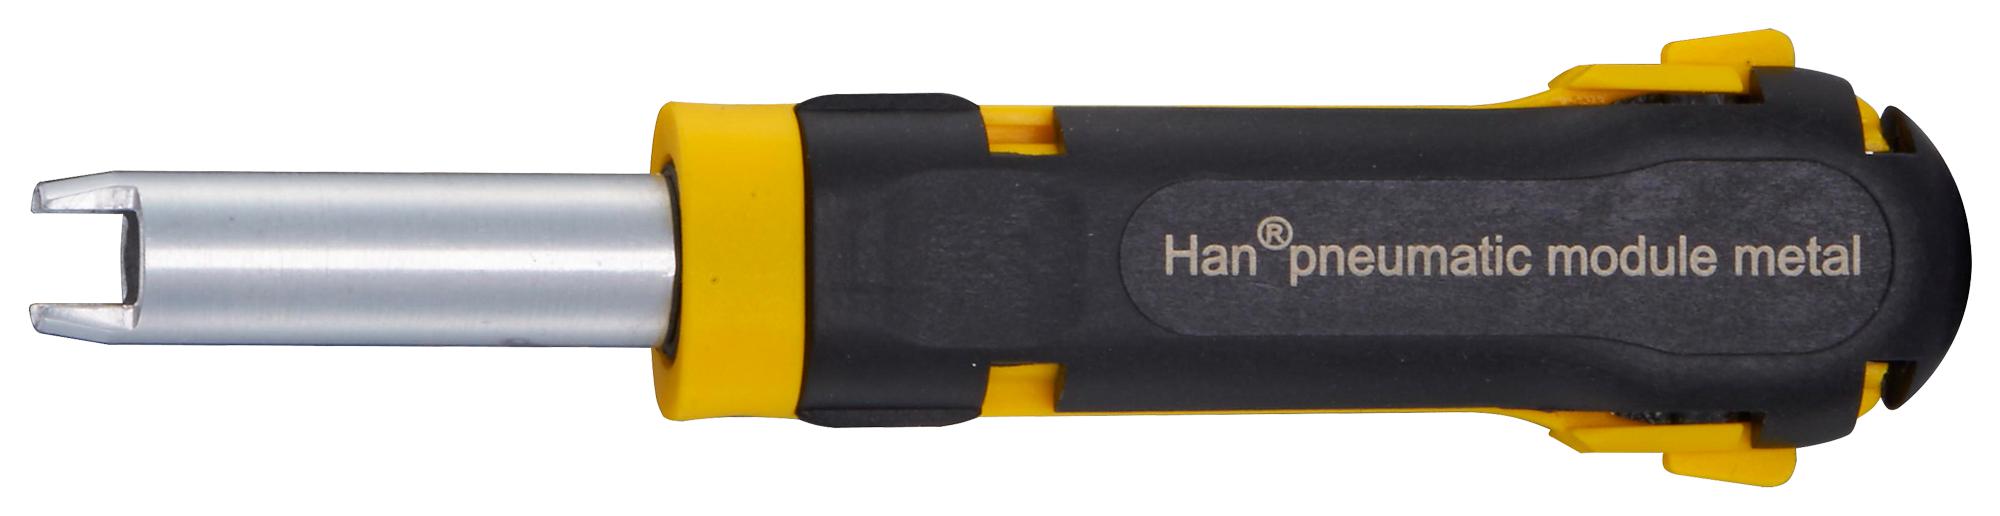 09990000899 REMOVAL TOOL, PNEUMATIC CONTACT HARTING